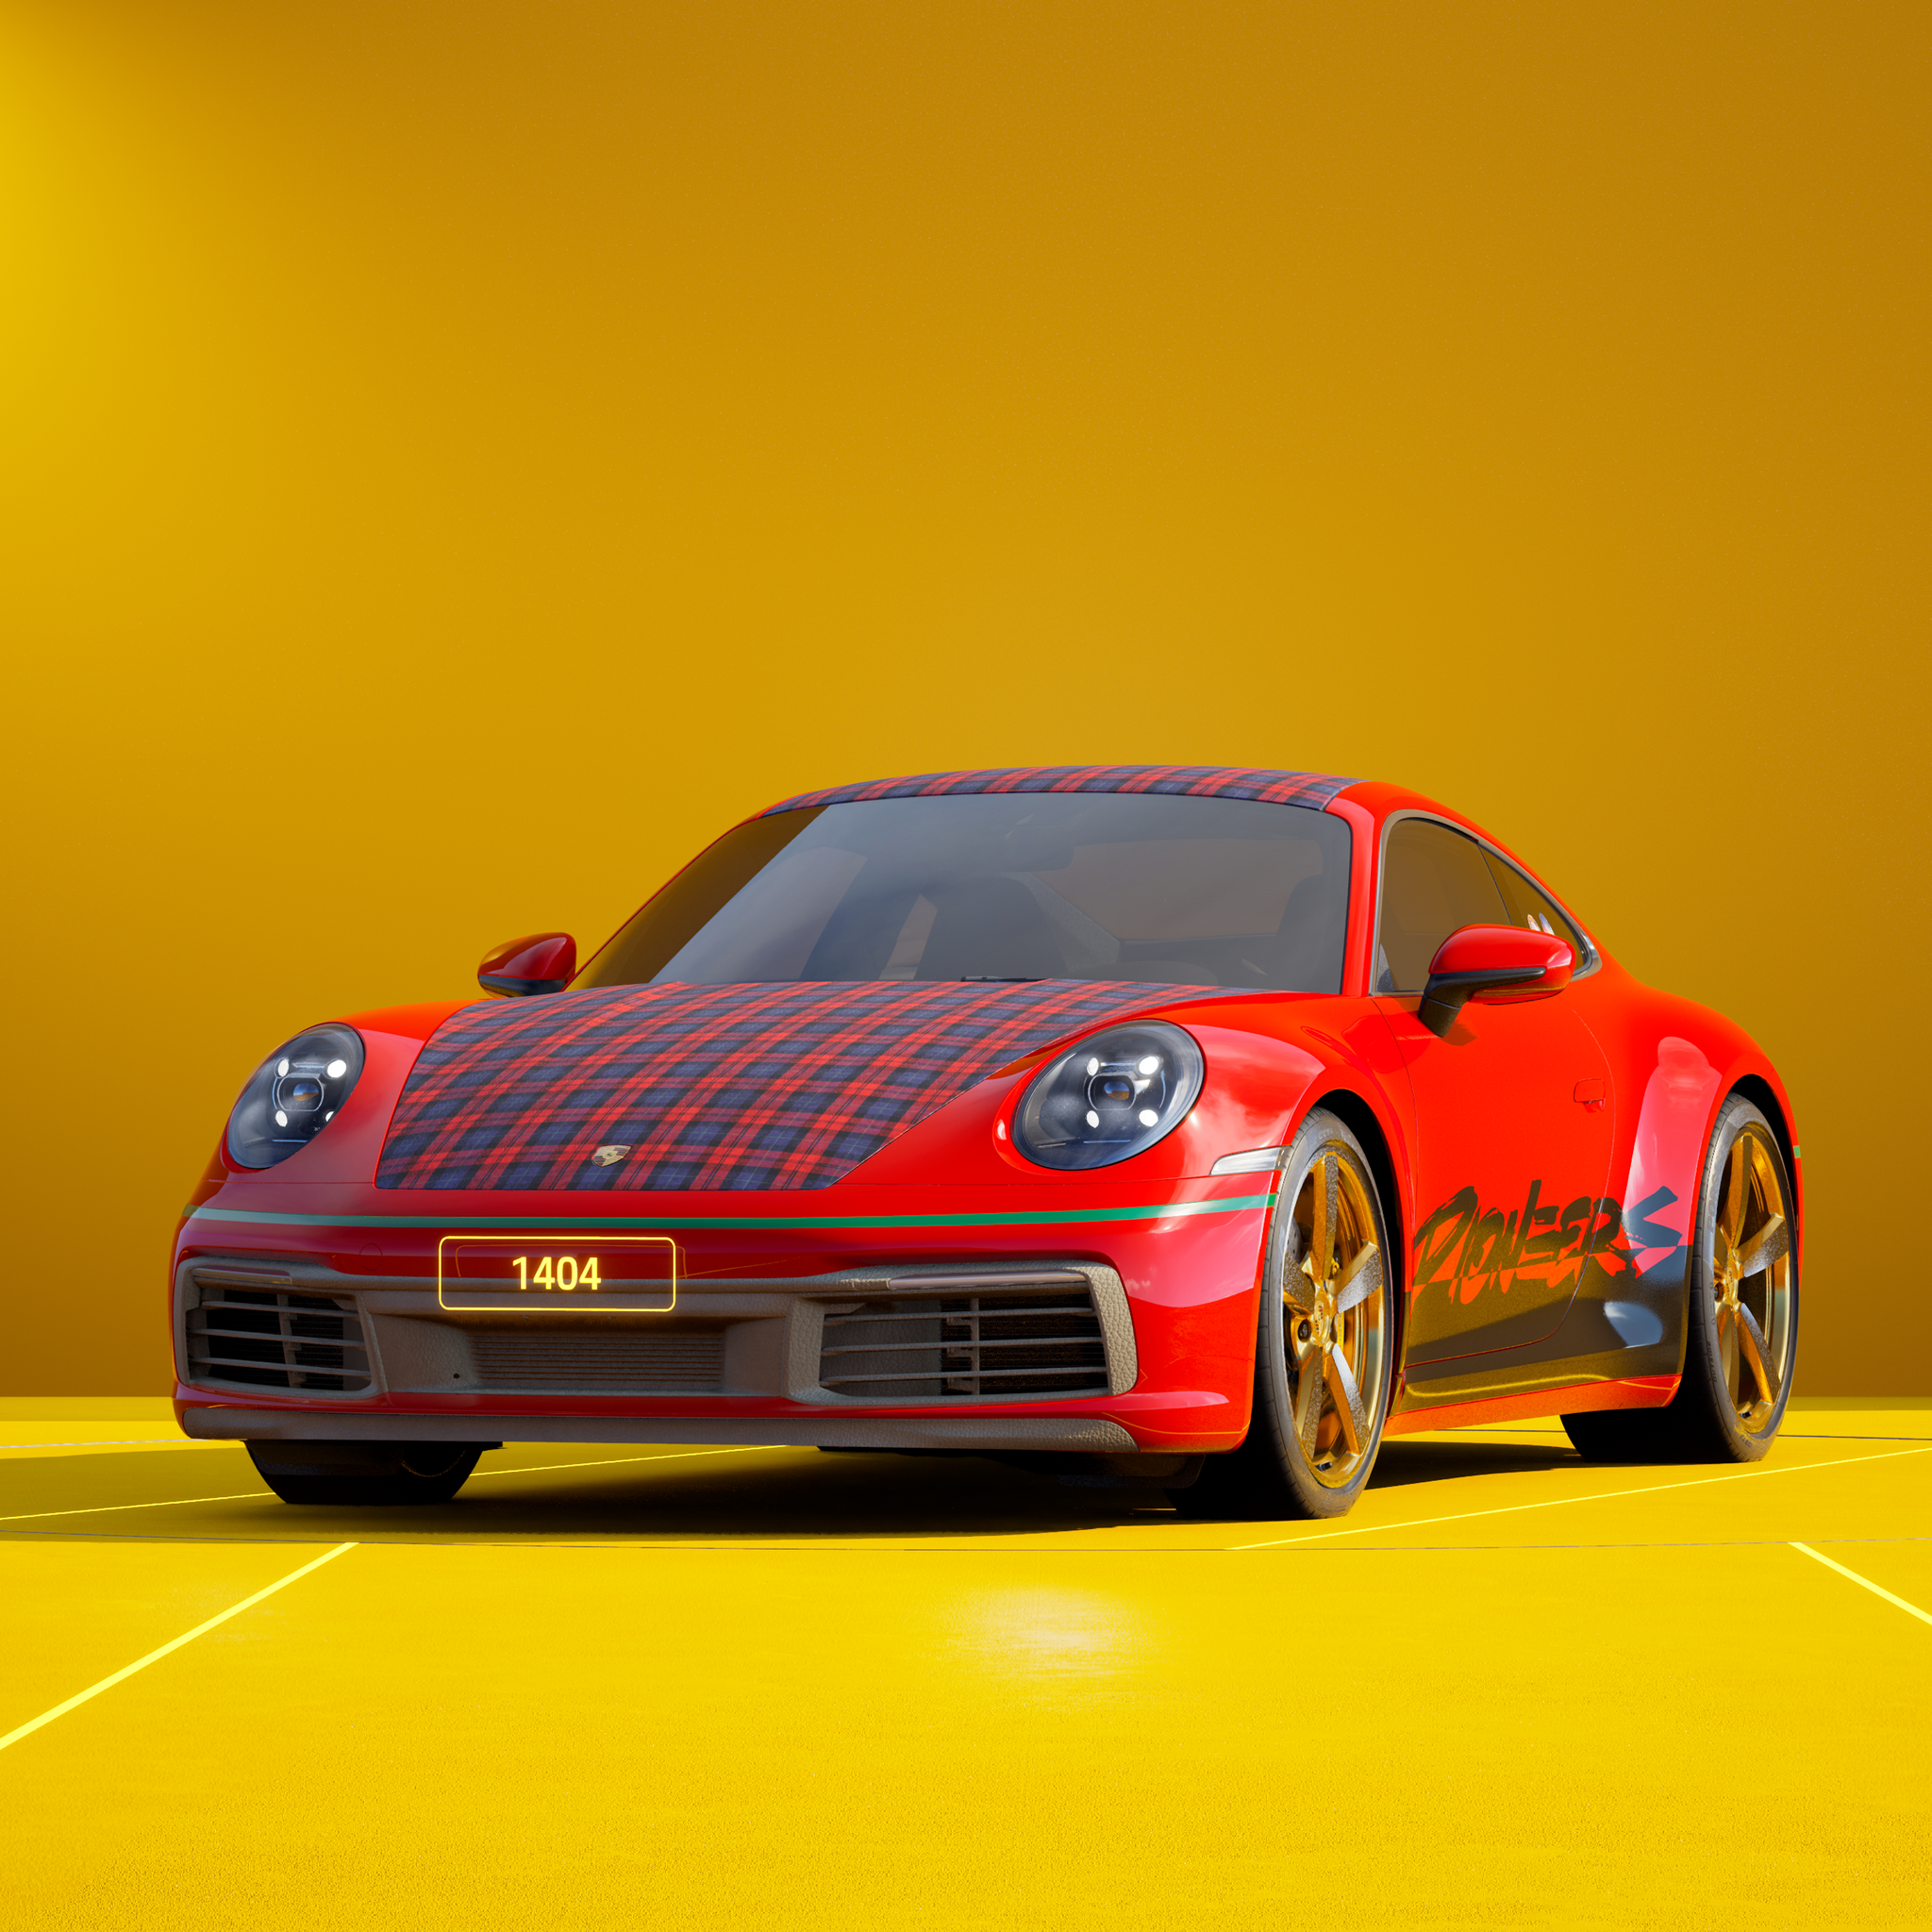 The PORSCHΞ 911 1404 image in phase